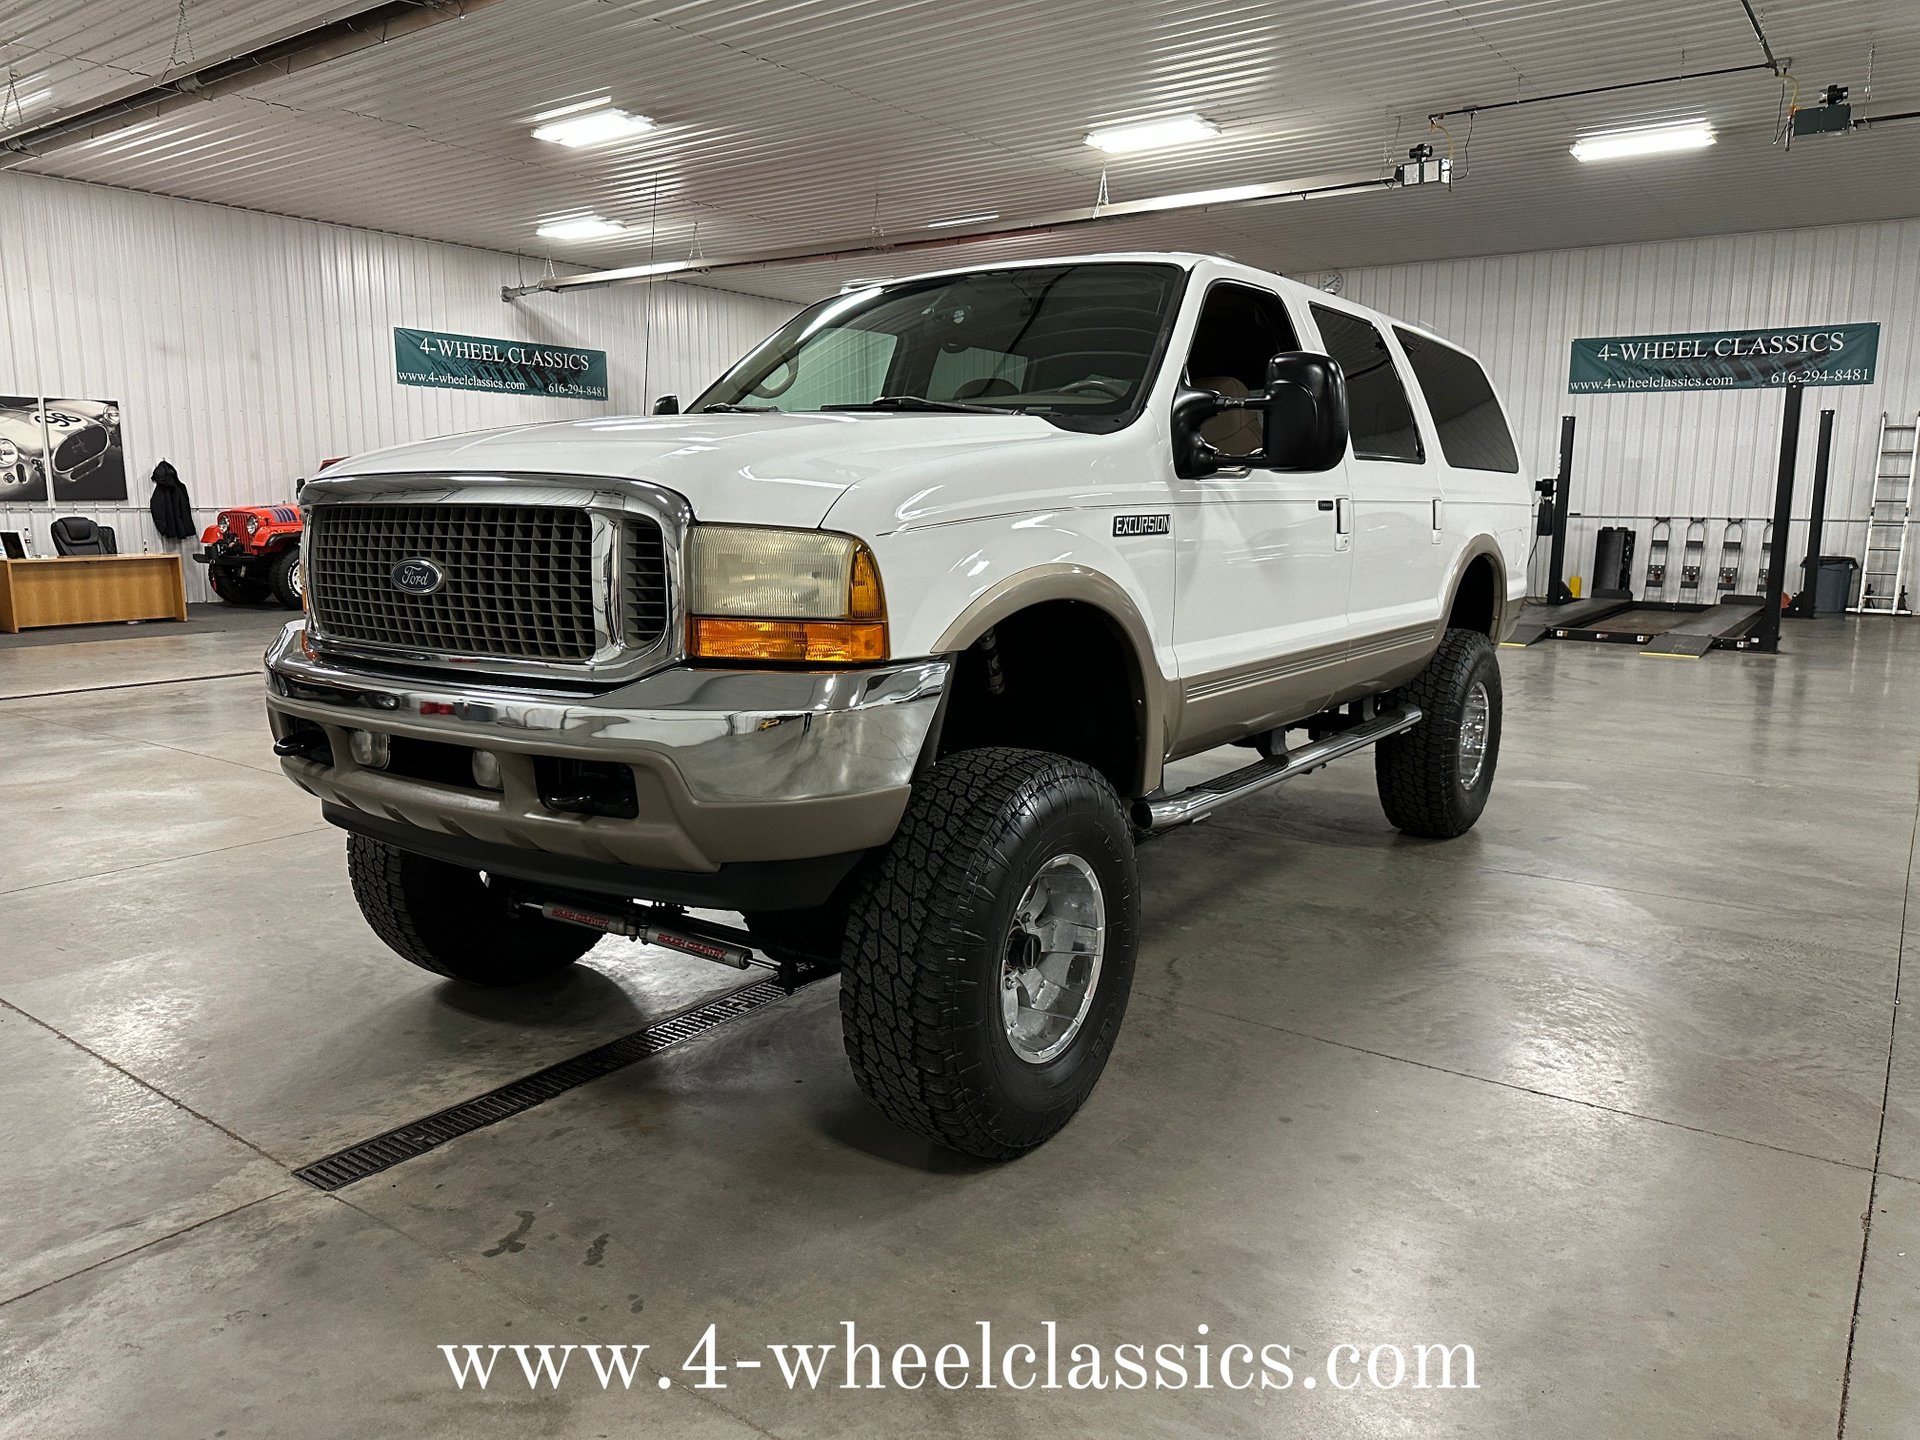 2001 ford excursion gear ratio